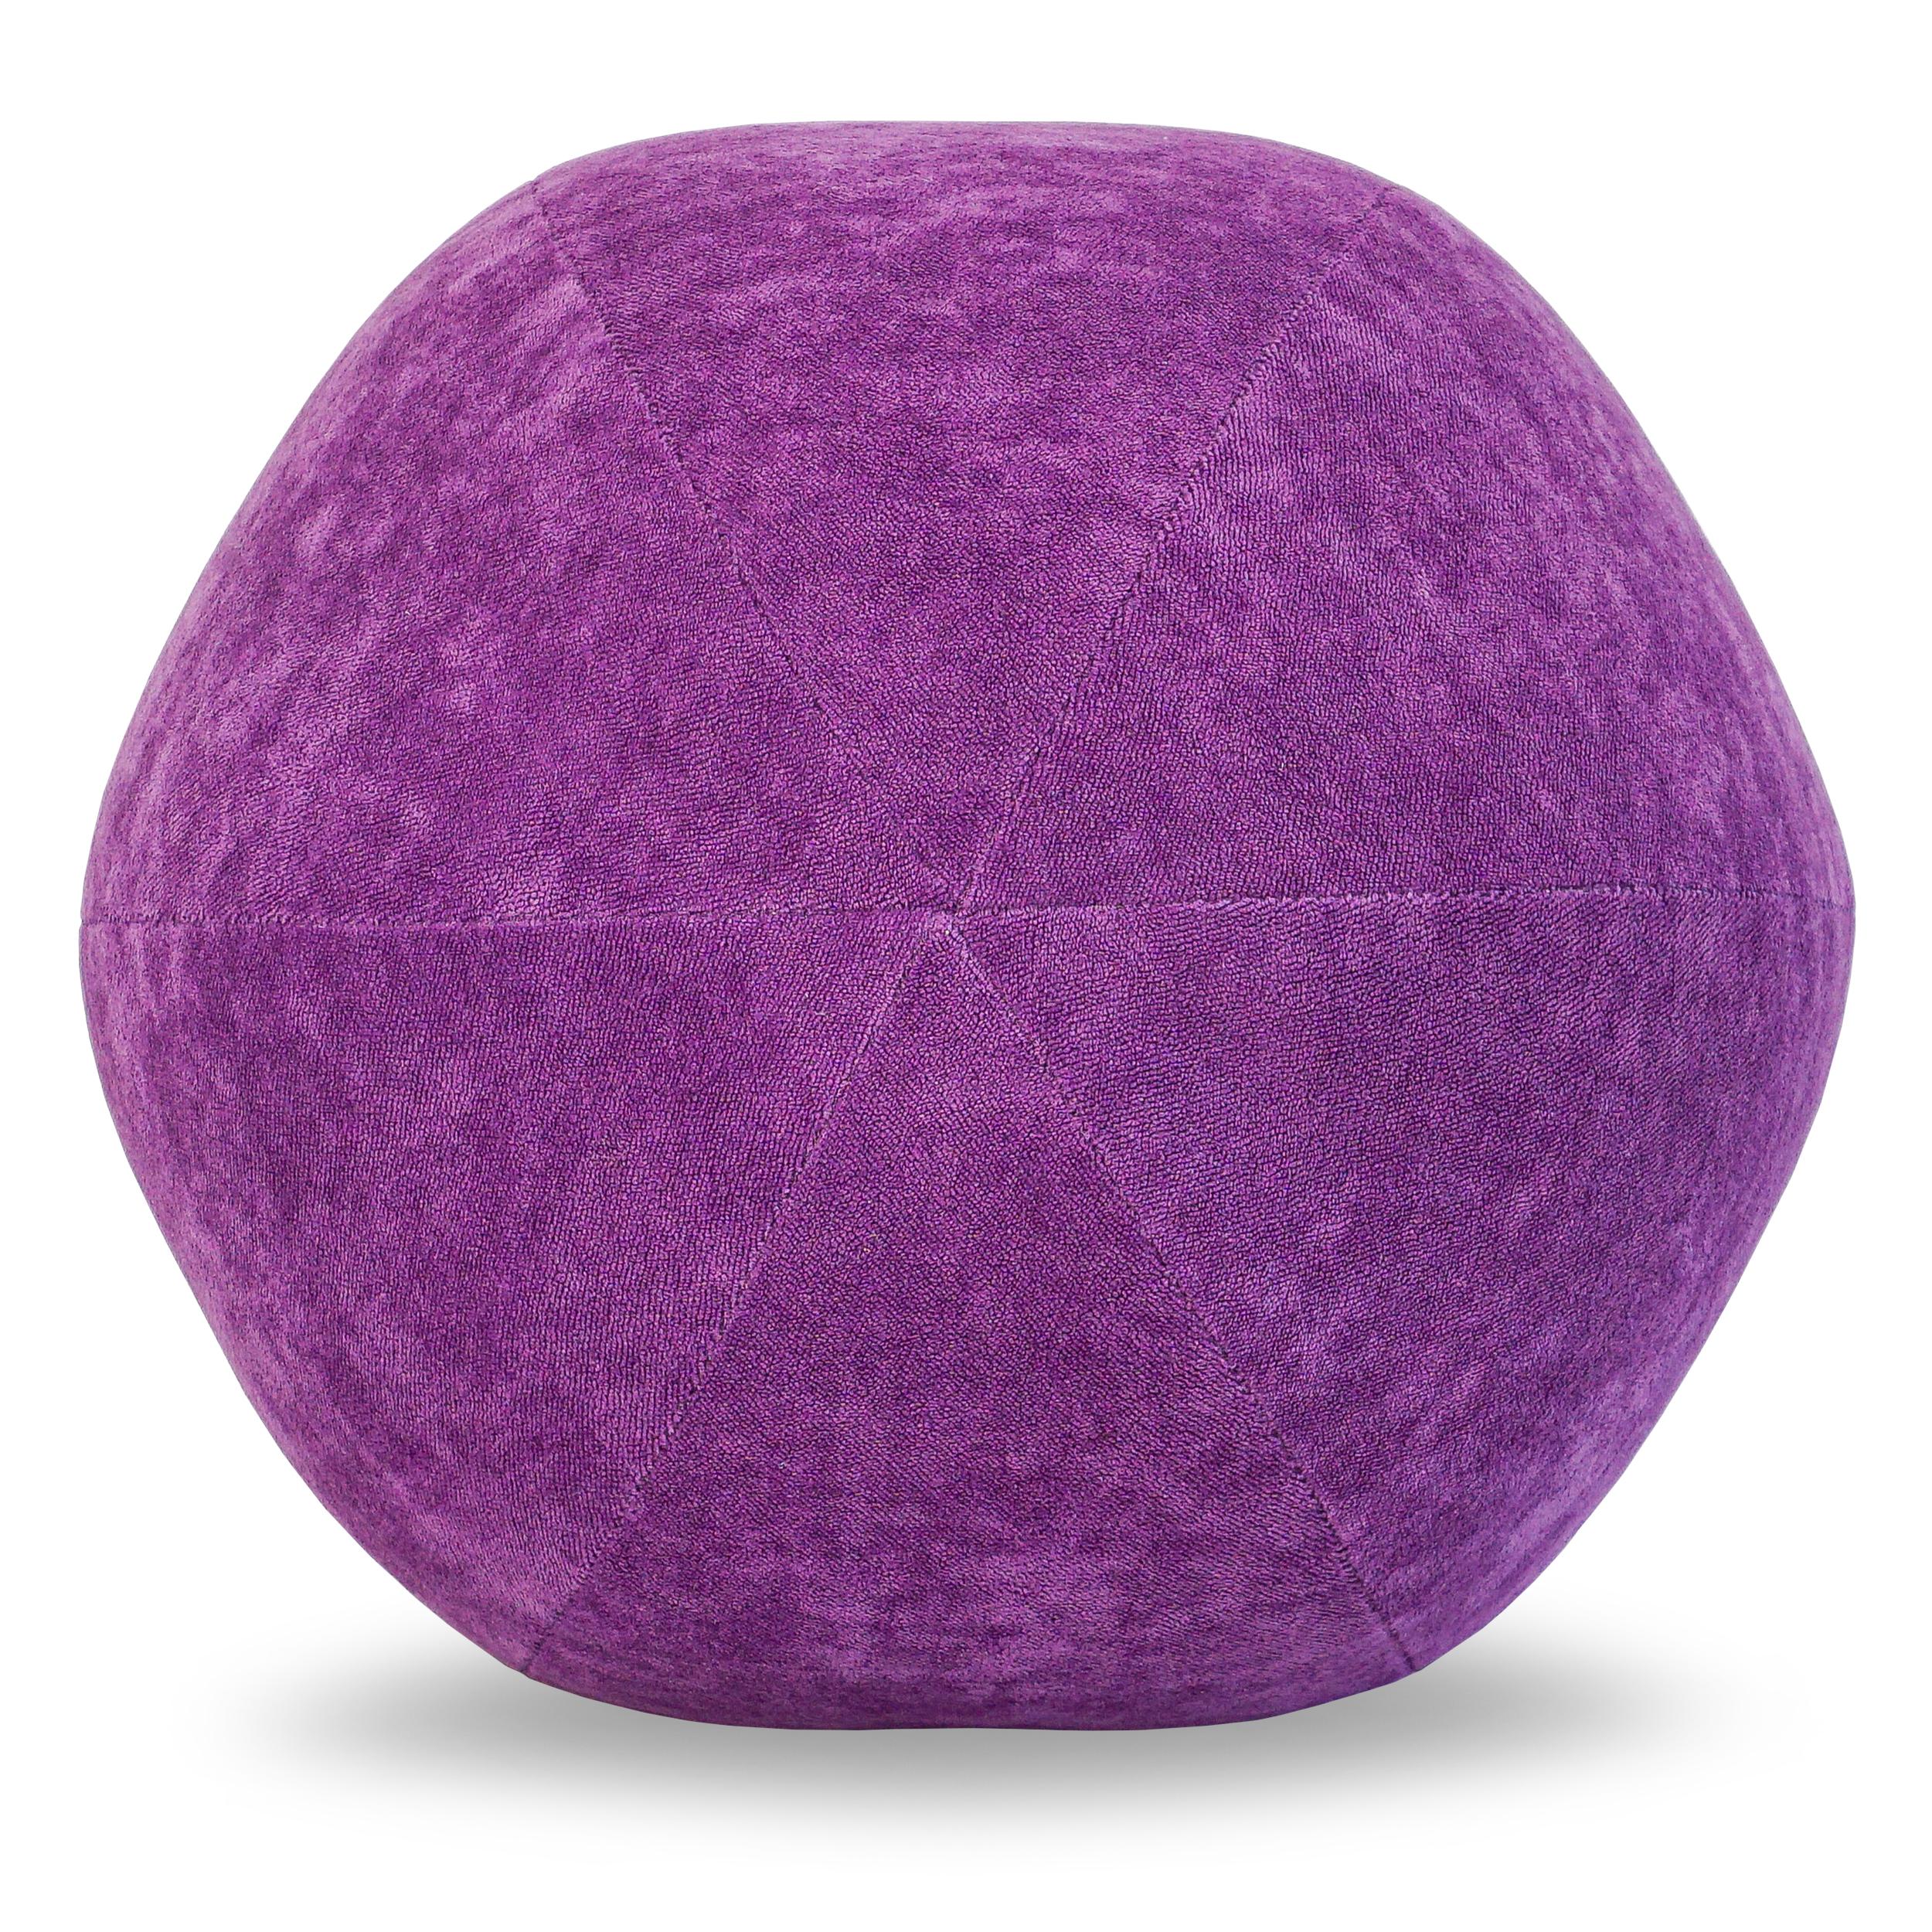 This ball pillow is covered in a soft terry-like velour fabric. Can be customized in any fabric. Ask for current availability as shown. 
 
Measurements:
Overall: 12” W x 12” Dia.
Disclaimer: Due to their handcrafted nature, the final size and shape